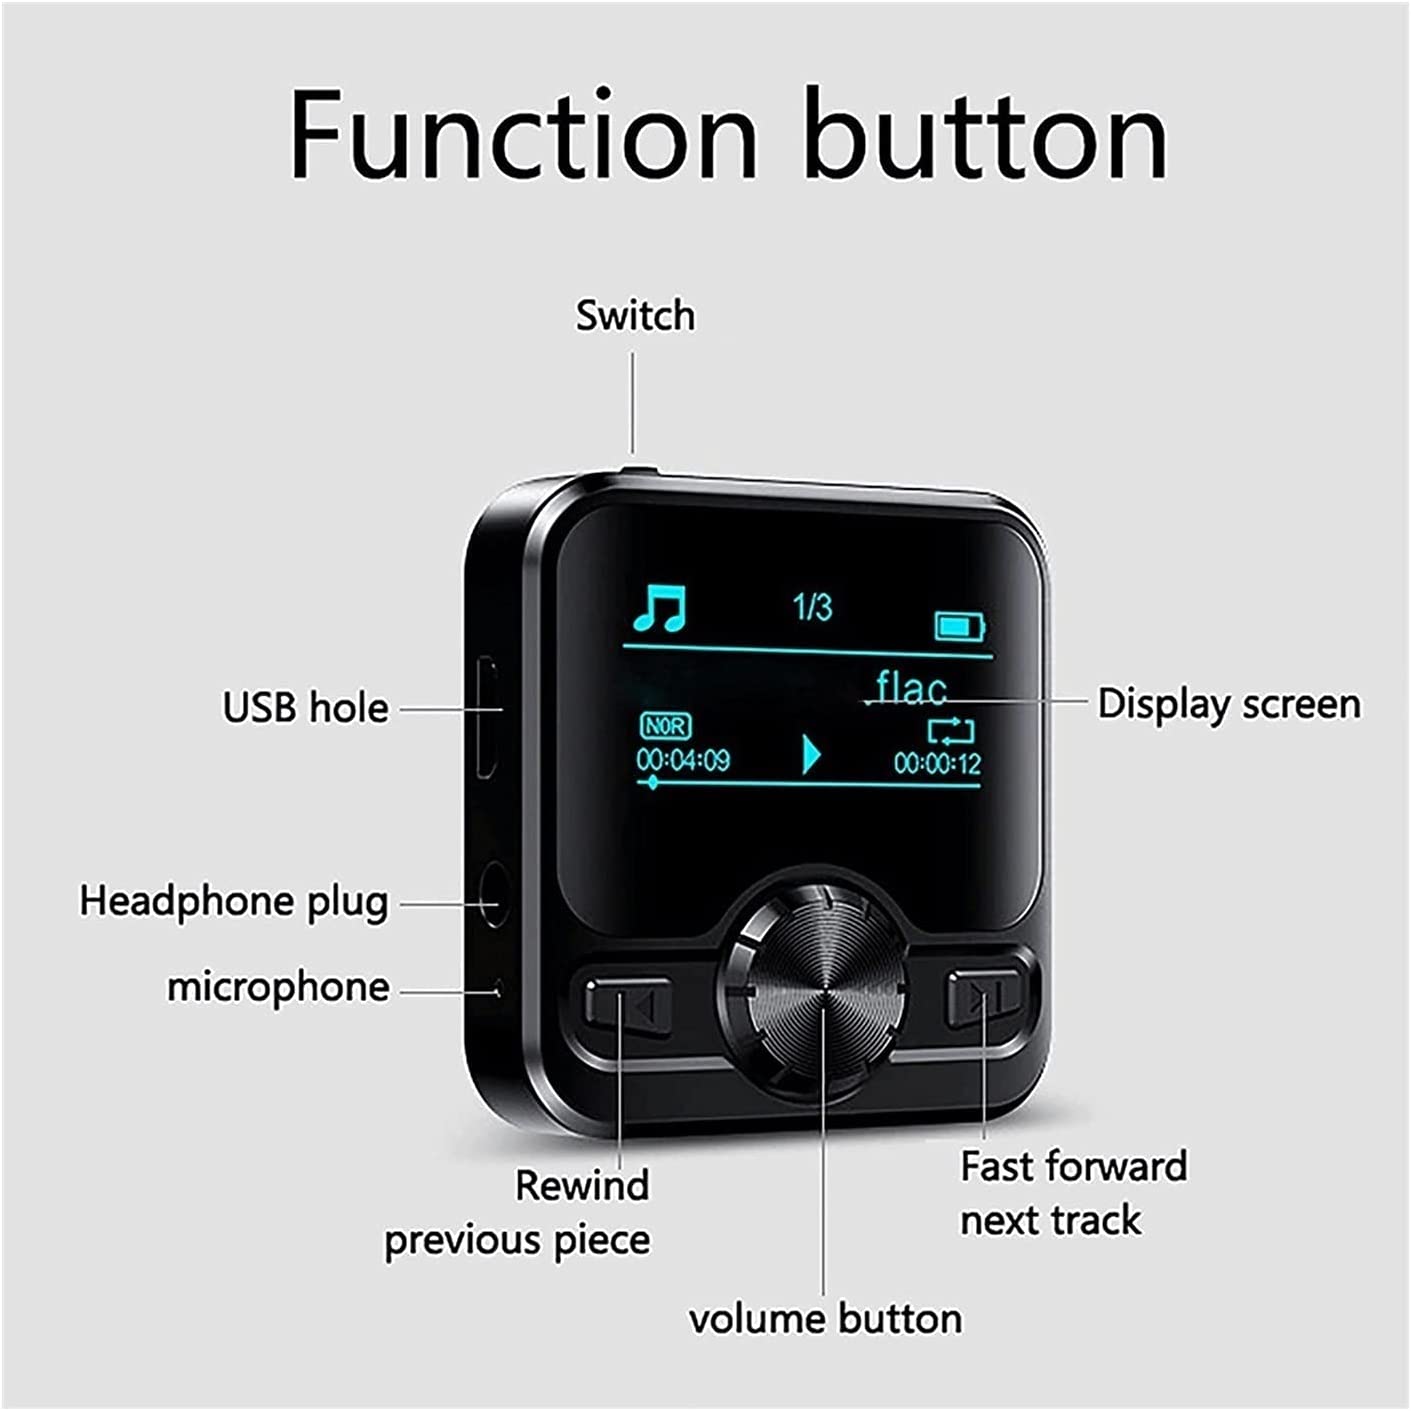 MERSHAO MP3 Player, 1.2 Inch Full Touchscreen 32GB mp3 Players with Enhanced Bluetooth - HiFi Lossless Sound, Line in Burn Music, Voice recorde, FM, Long Battery Life